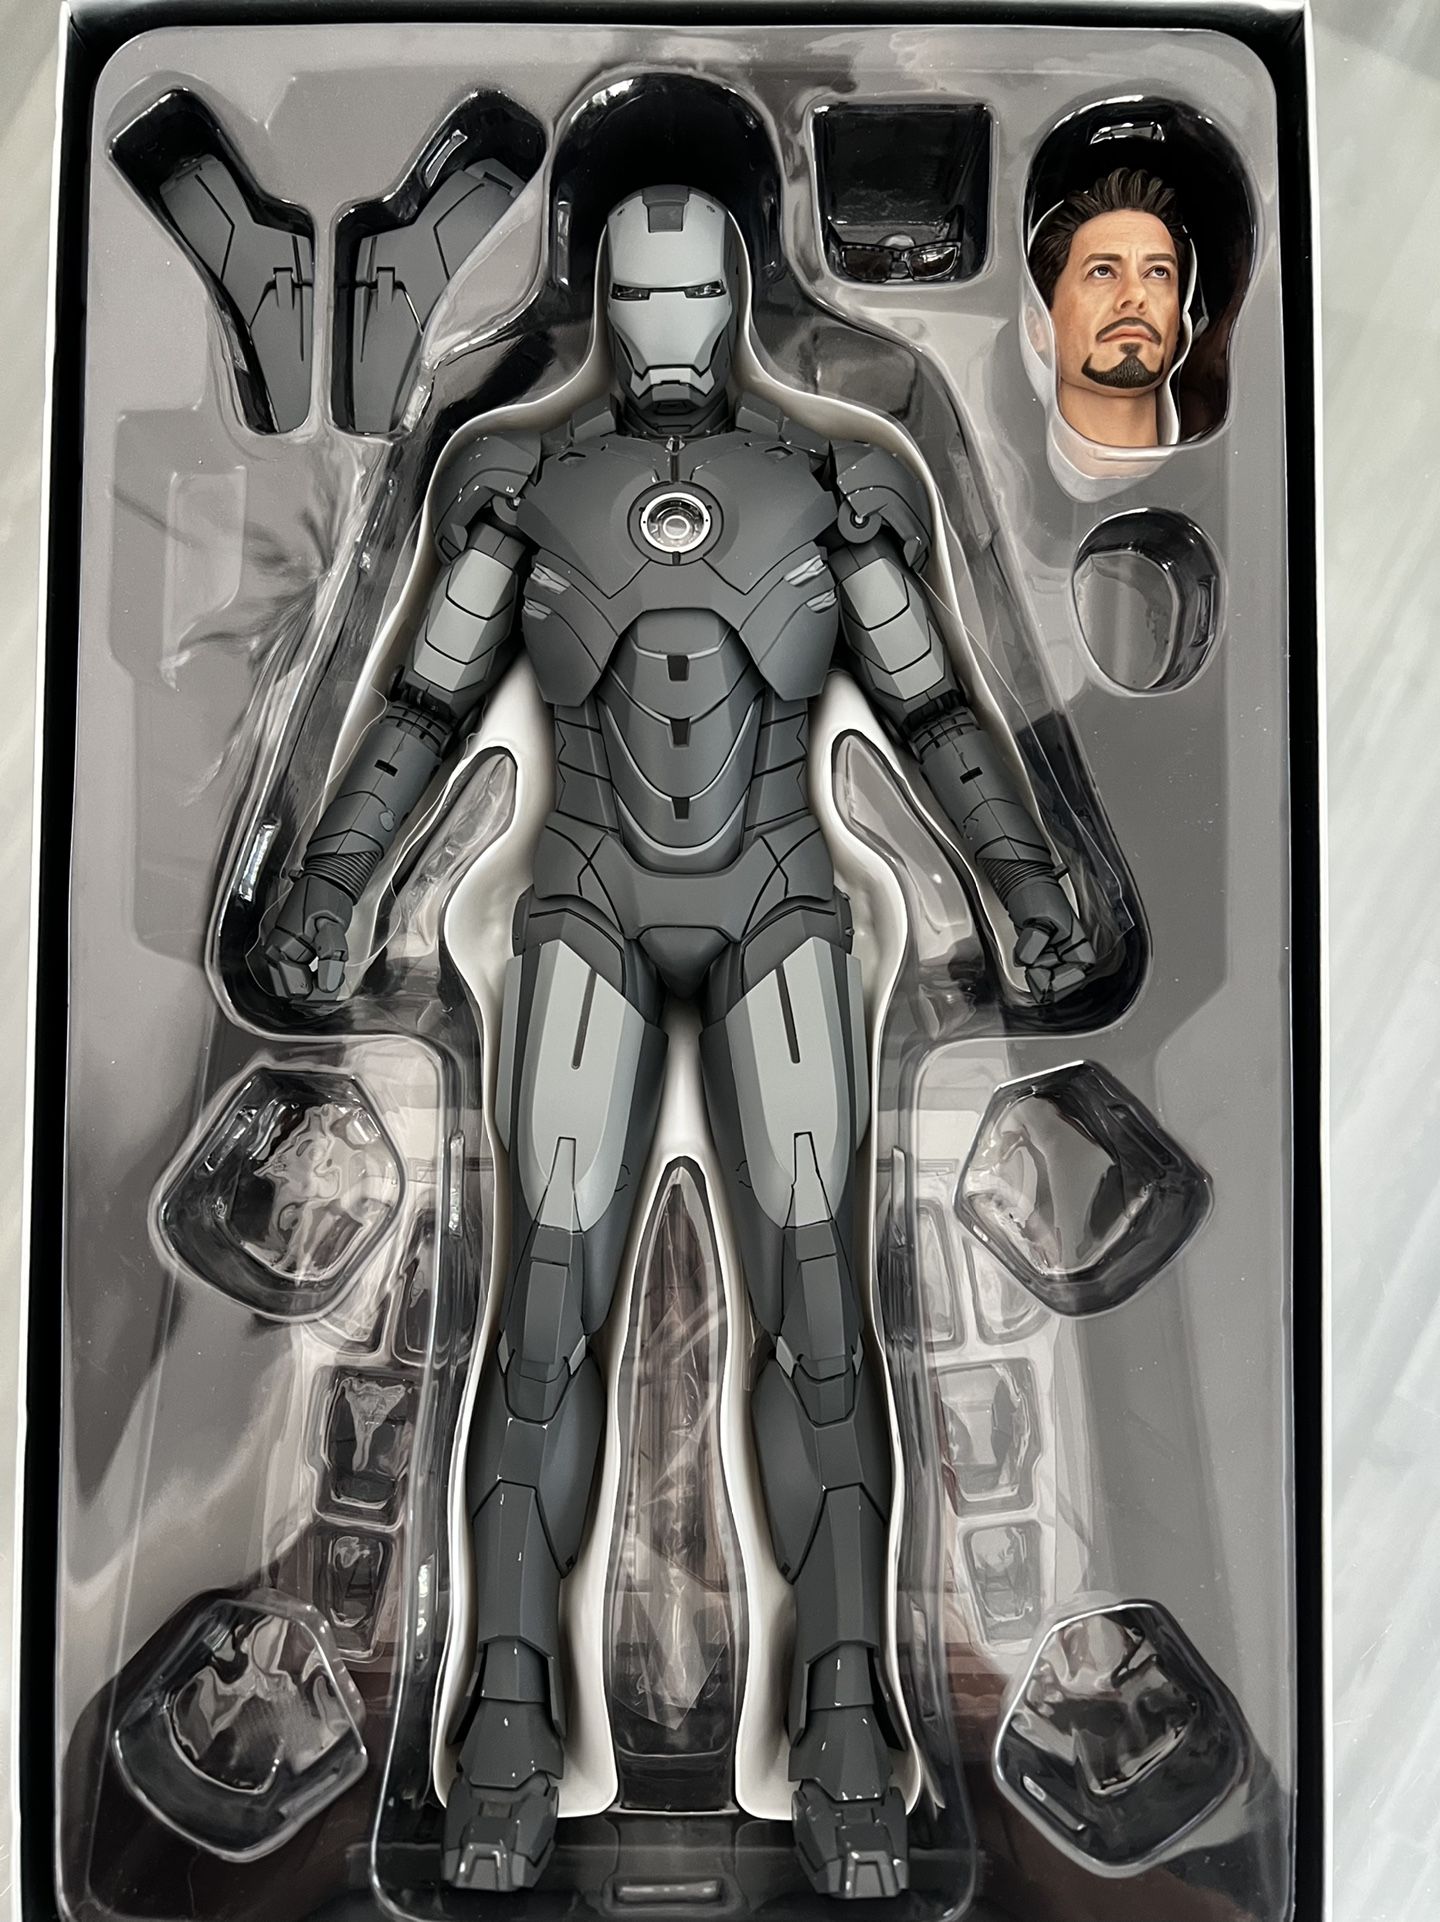 Ultra Rare Retired 1/6 Hot Toys / Sideshow Exclusive Iron Man Mark IV (4) Secret Project Model In Stealth Military Gray From Iron Man 2 Movie